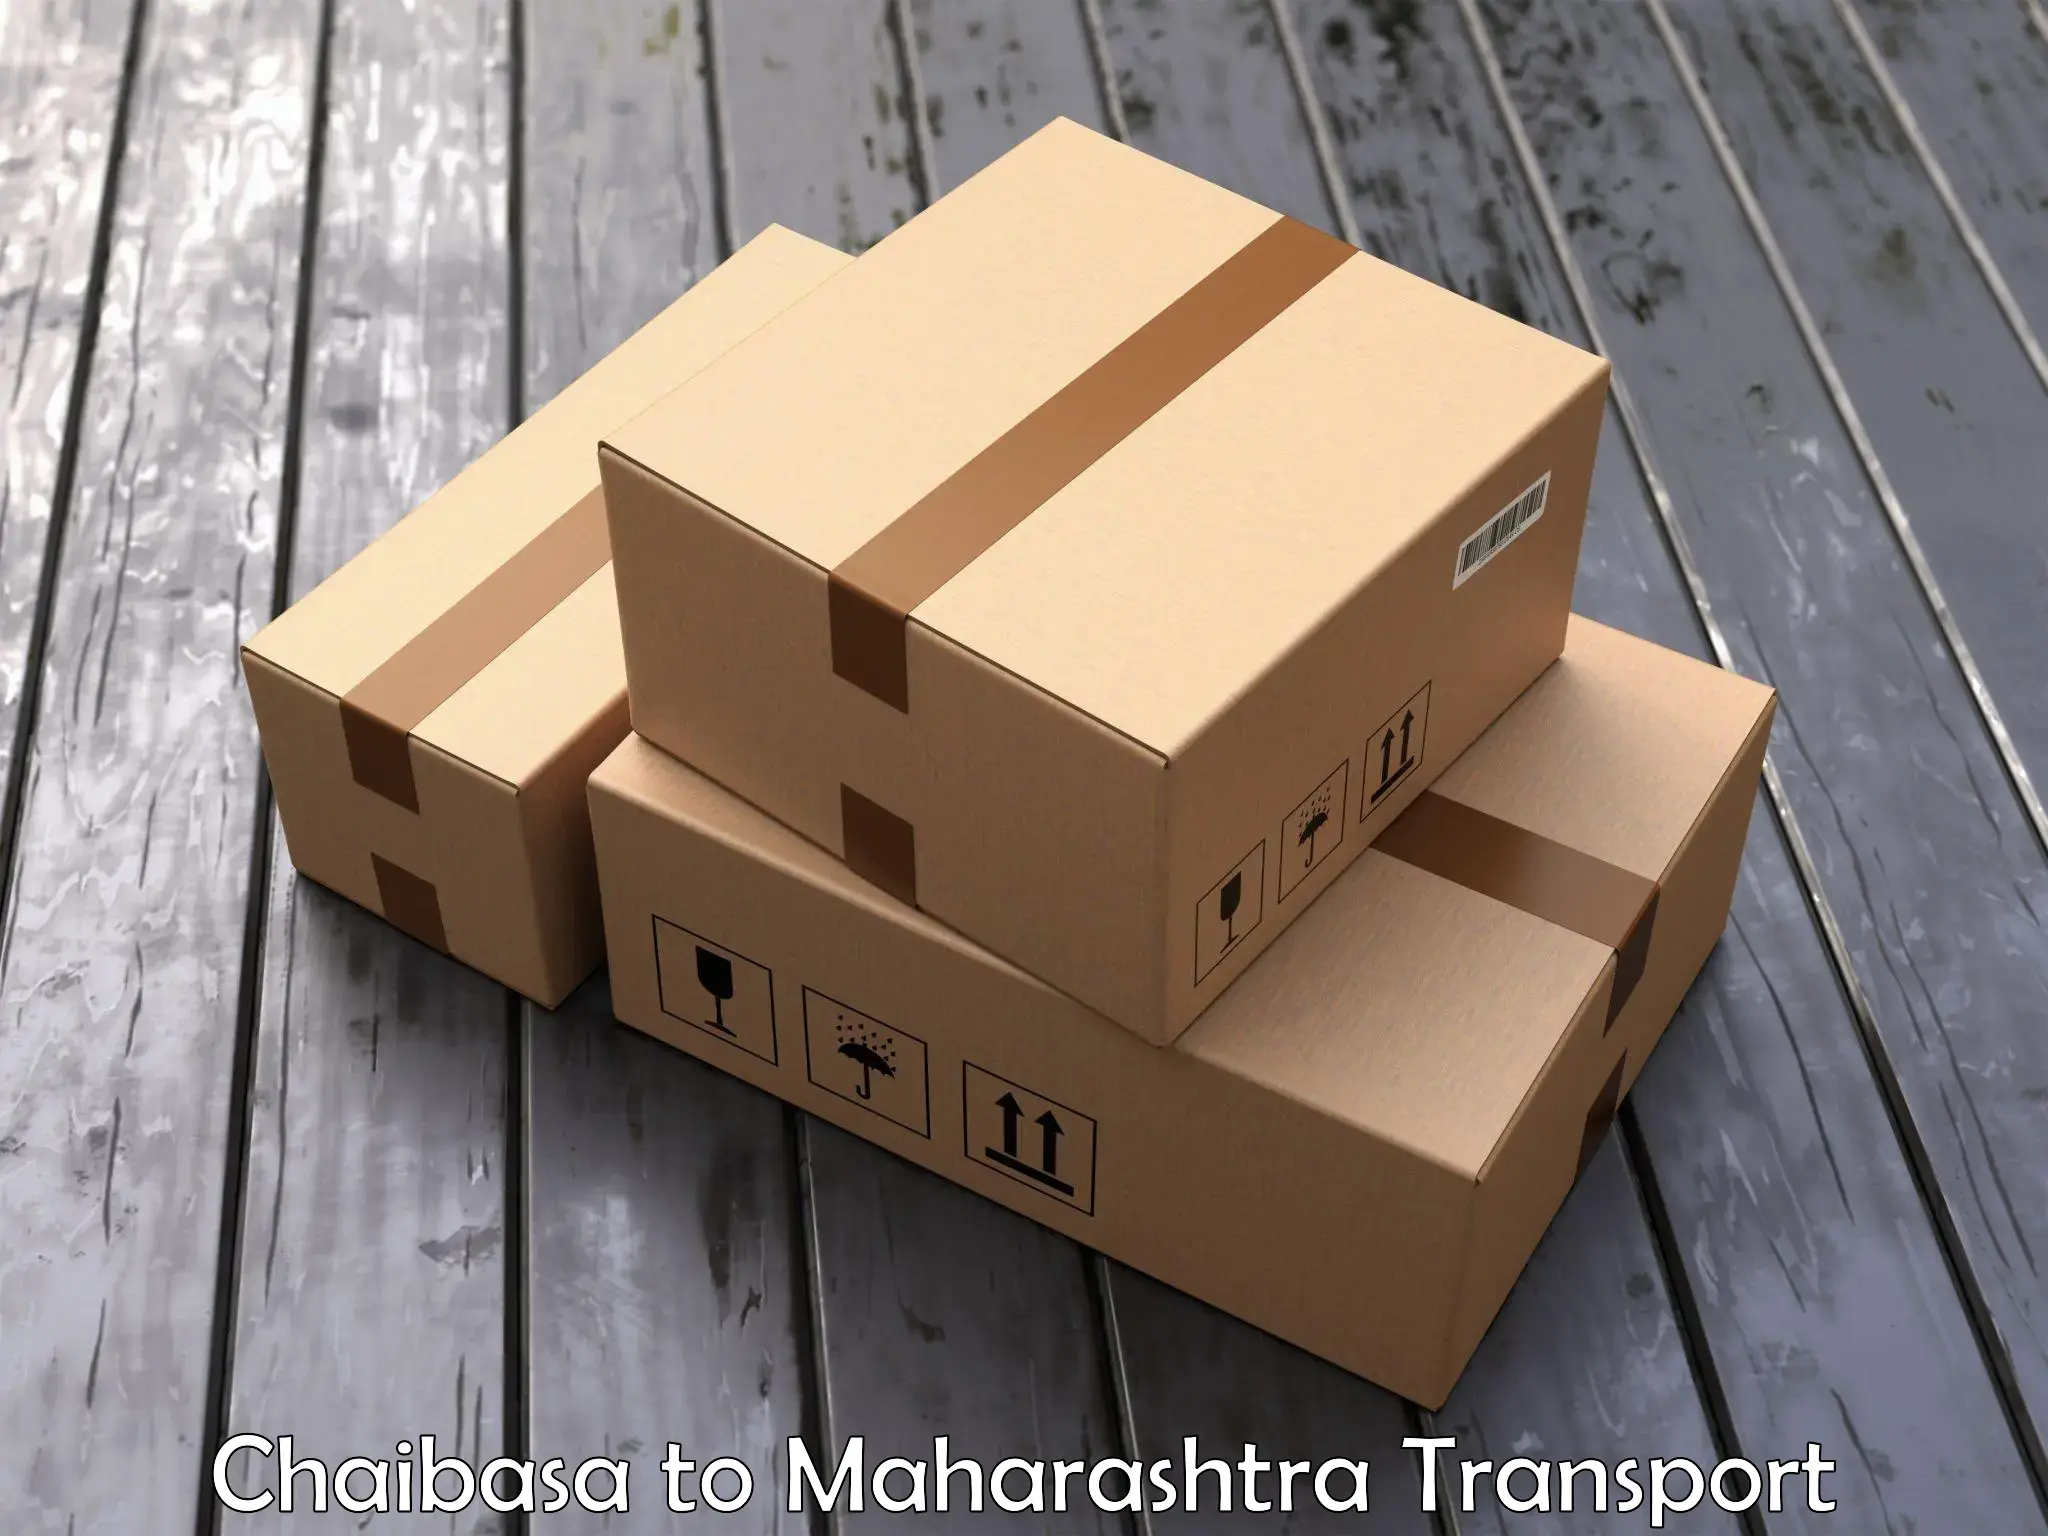 Part load transport service in India Chaibasa to Lonar